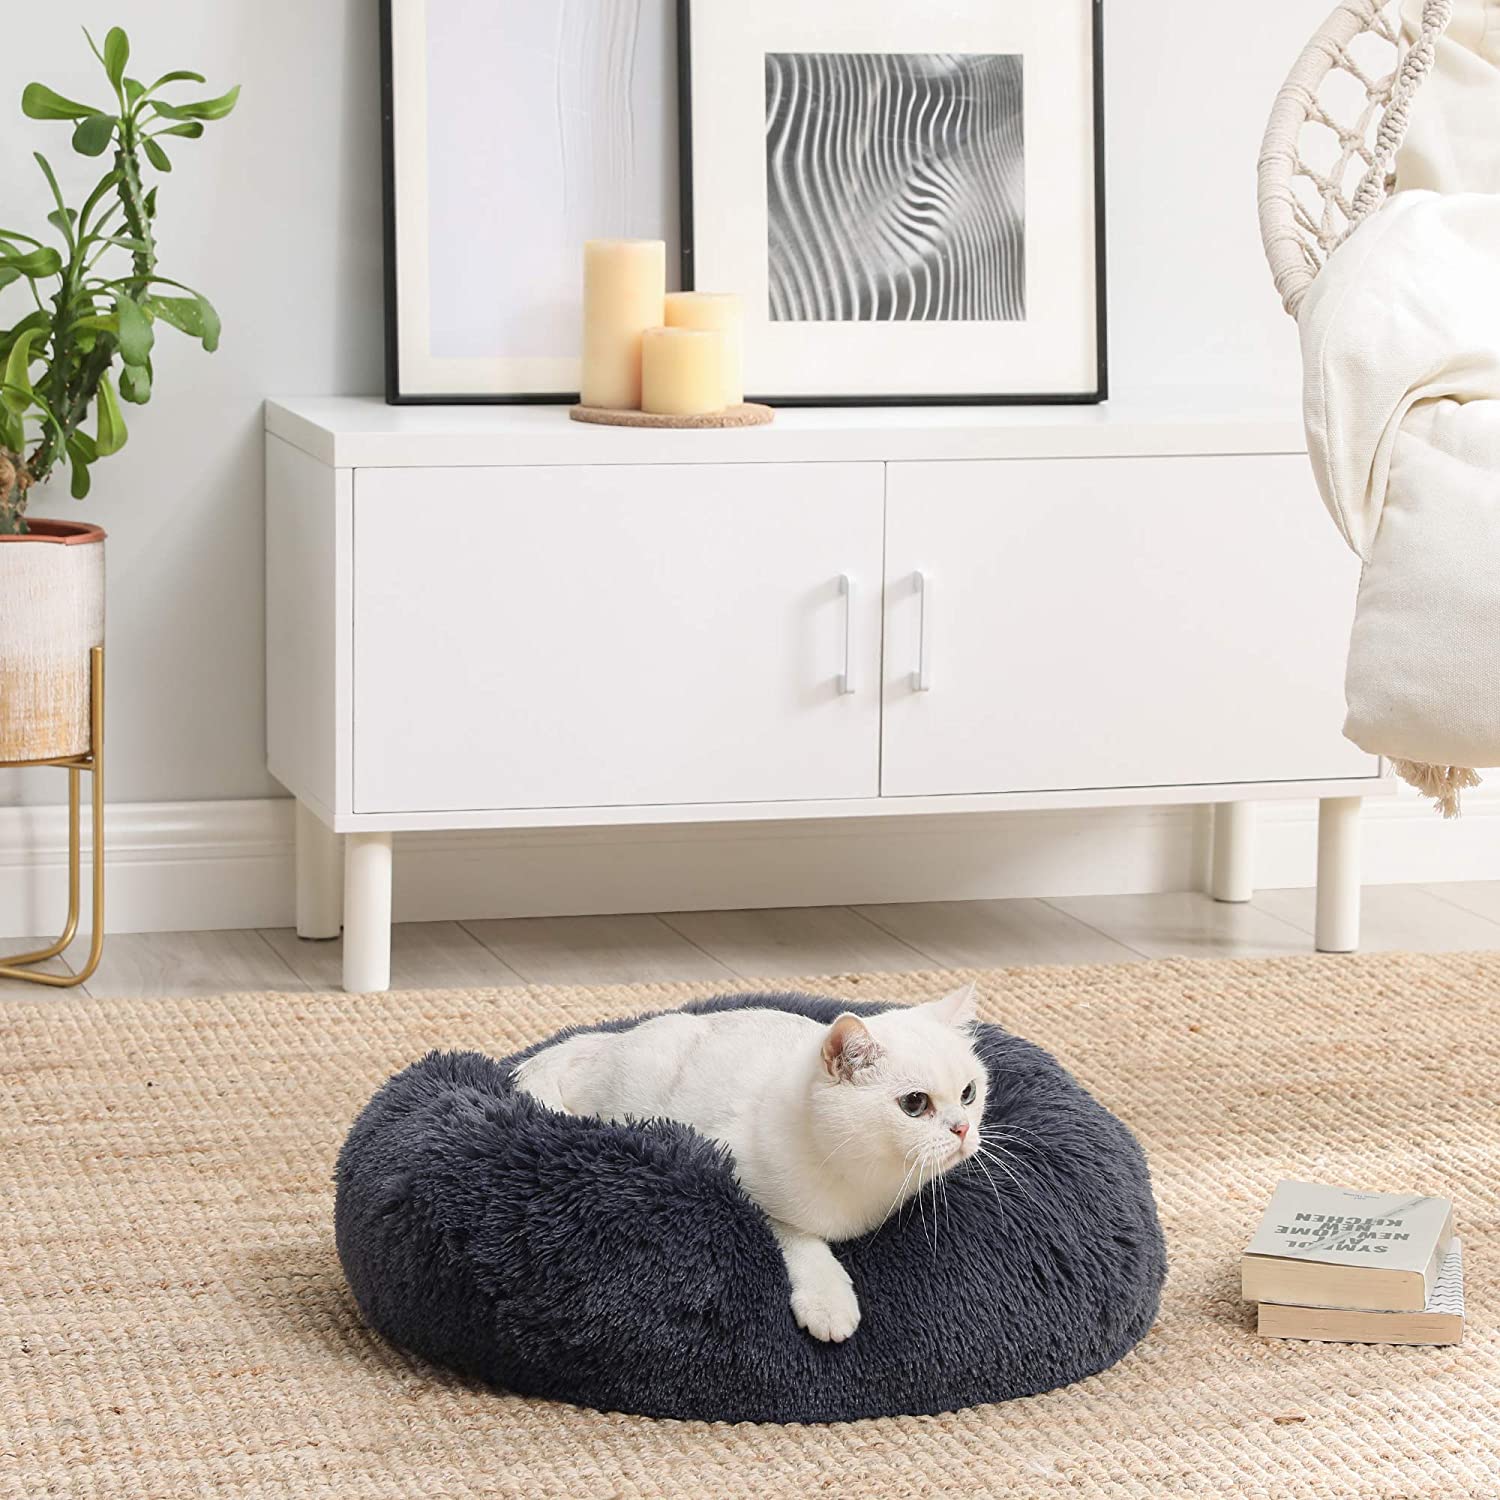 Nancy's Busby Pet Bed - Dog Bed - Cat Bed - Soft Plush - Dark Gray - 50 x 20 cm